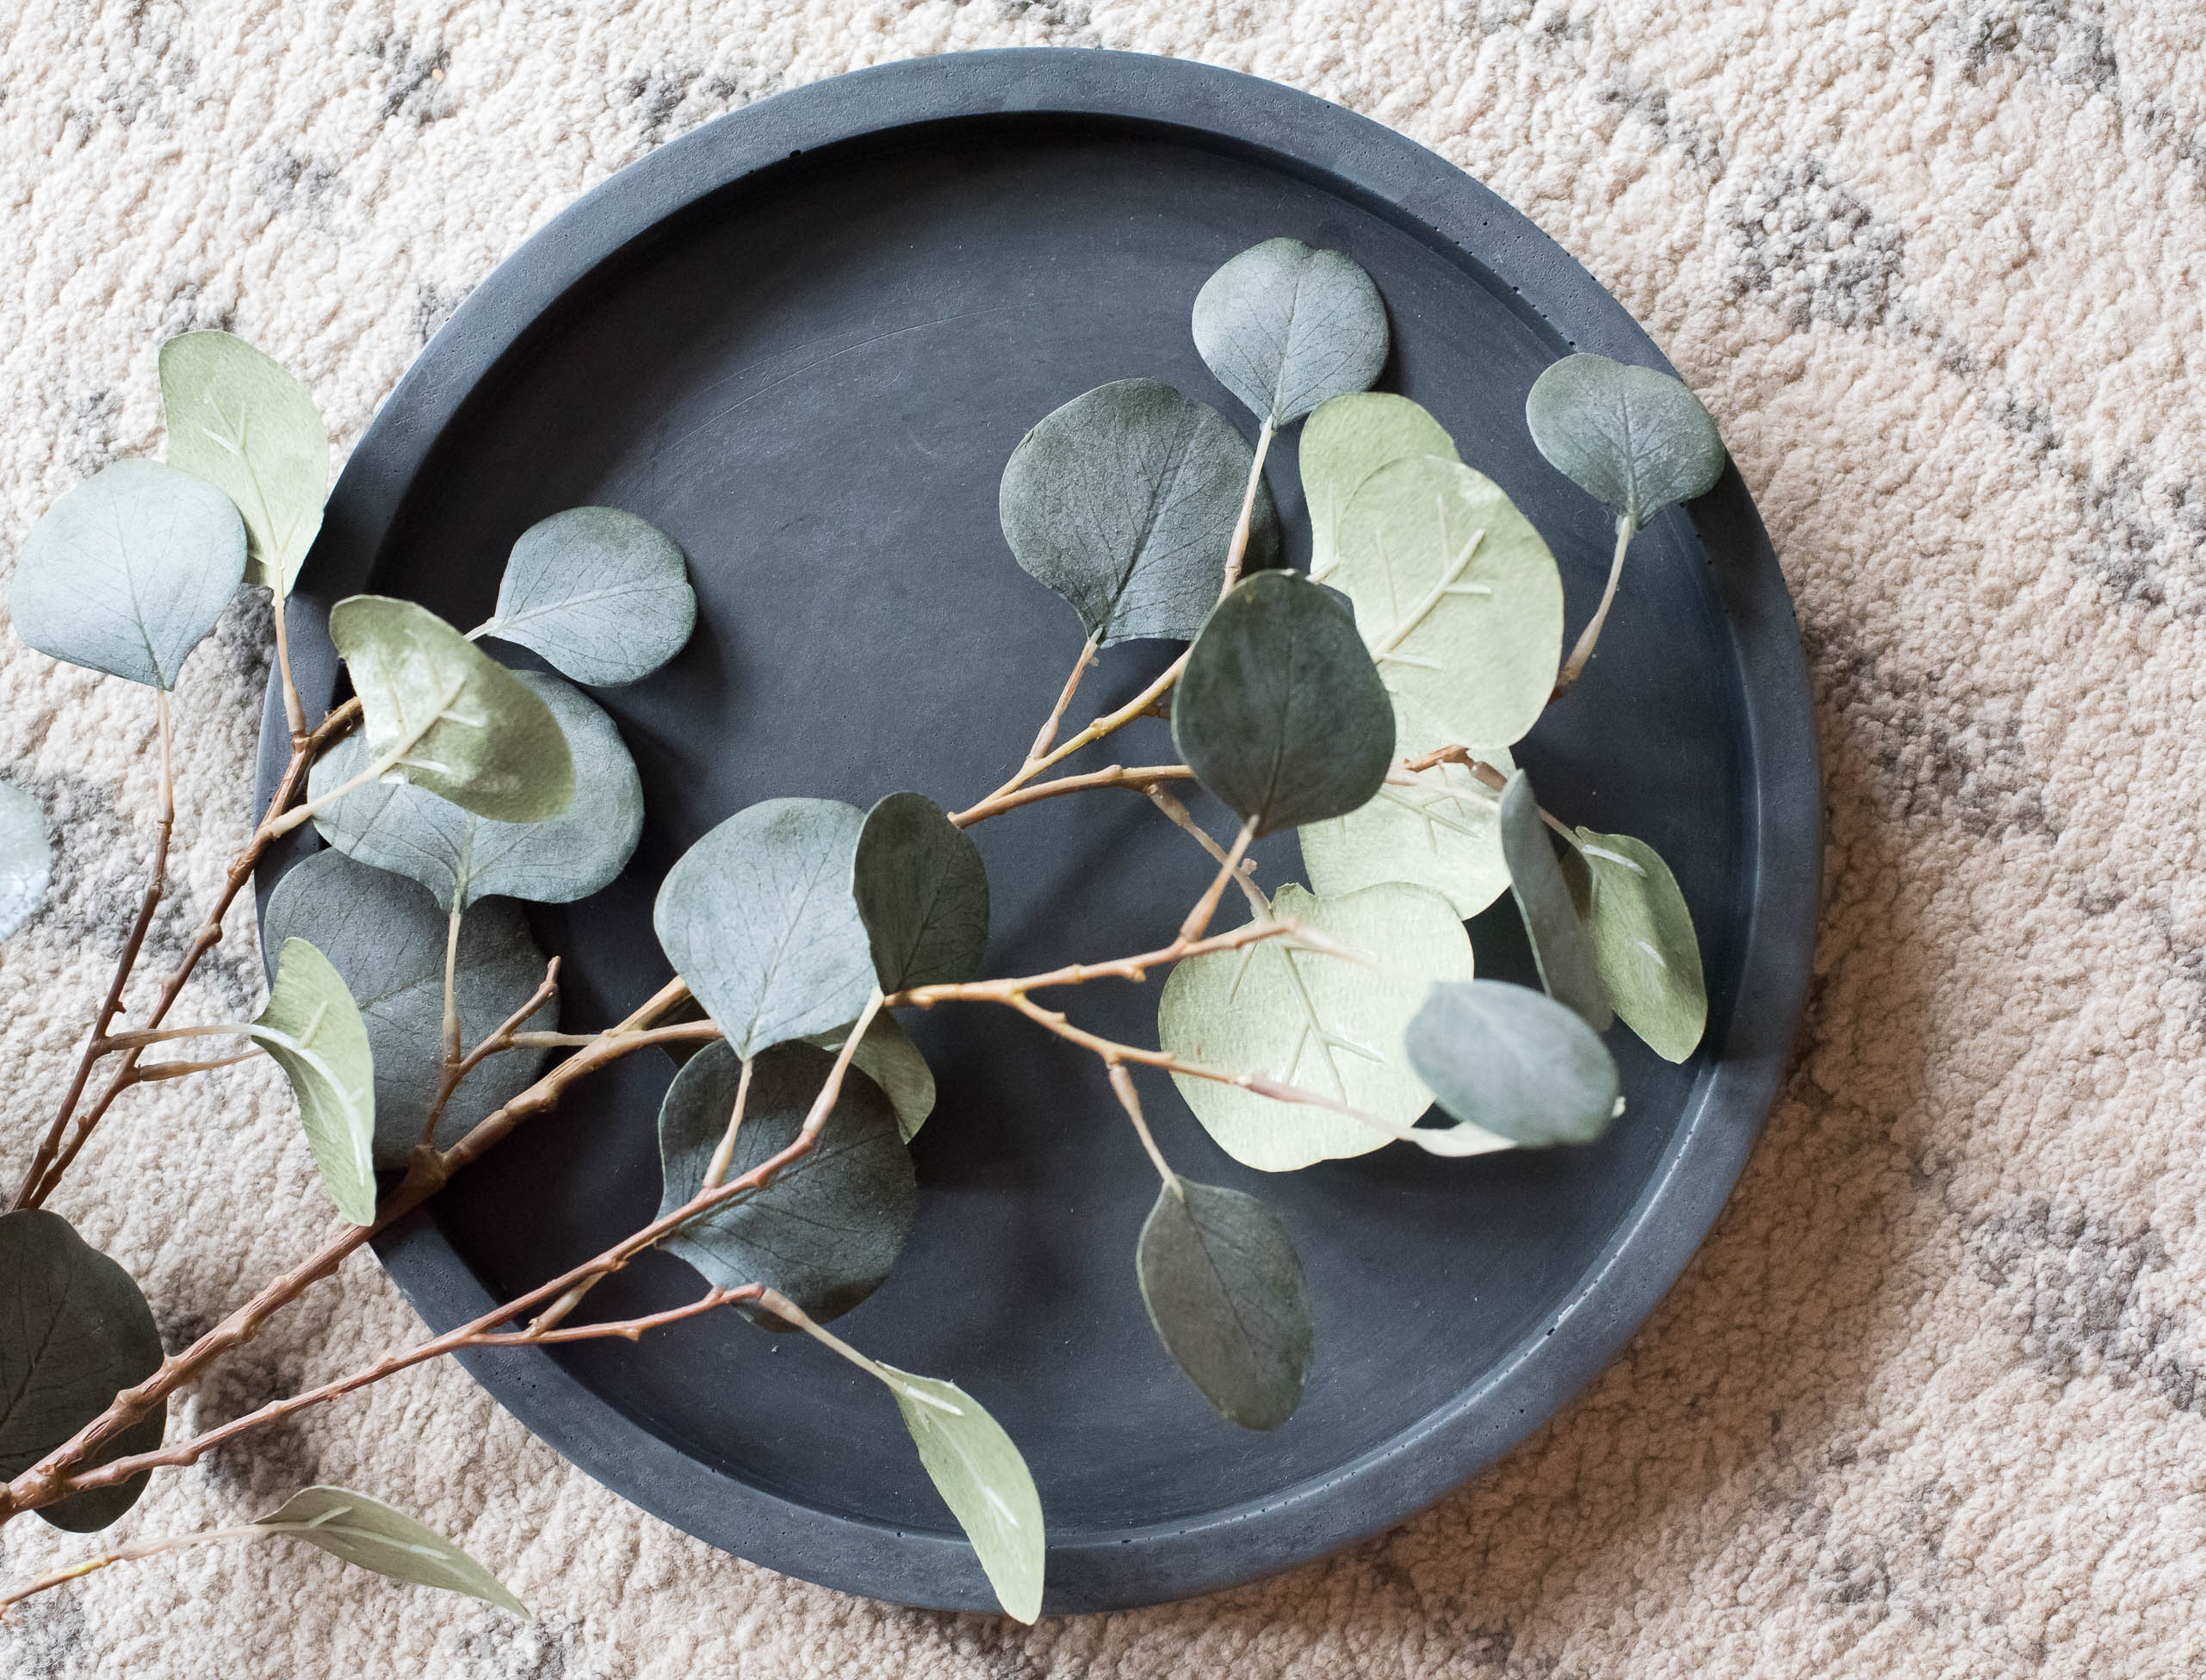 11.5" Round Concrete Tray - made by kippen